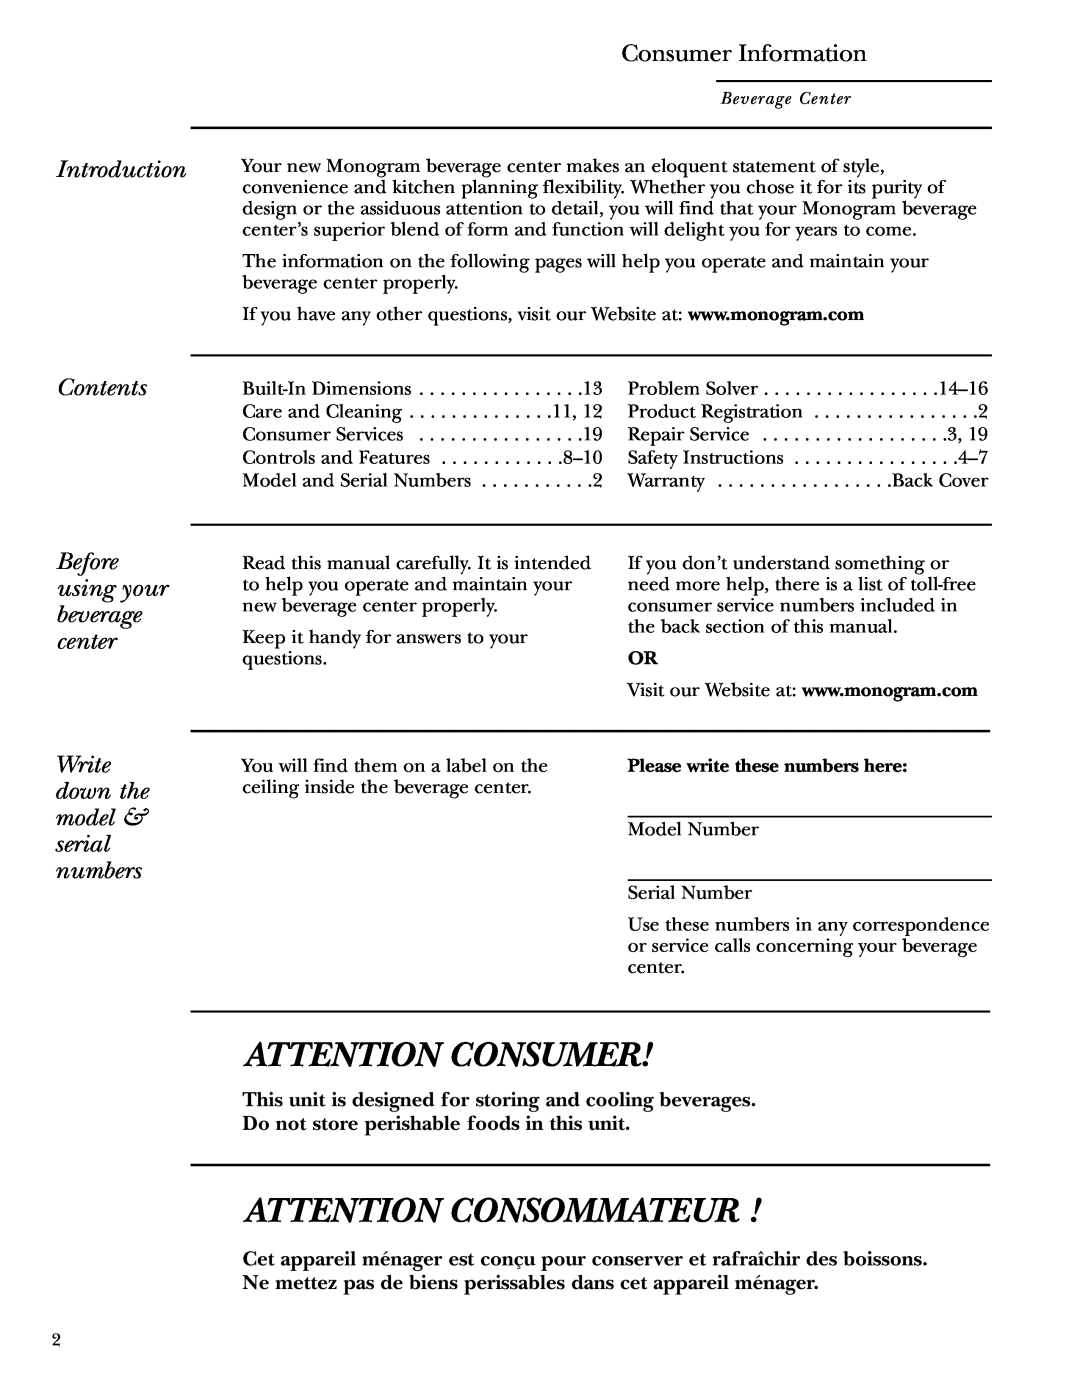 GE ZDBT240 owner manual Consumer Information, Introduction, Contents, Before using your beverage center, Attention Consumer 